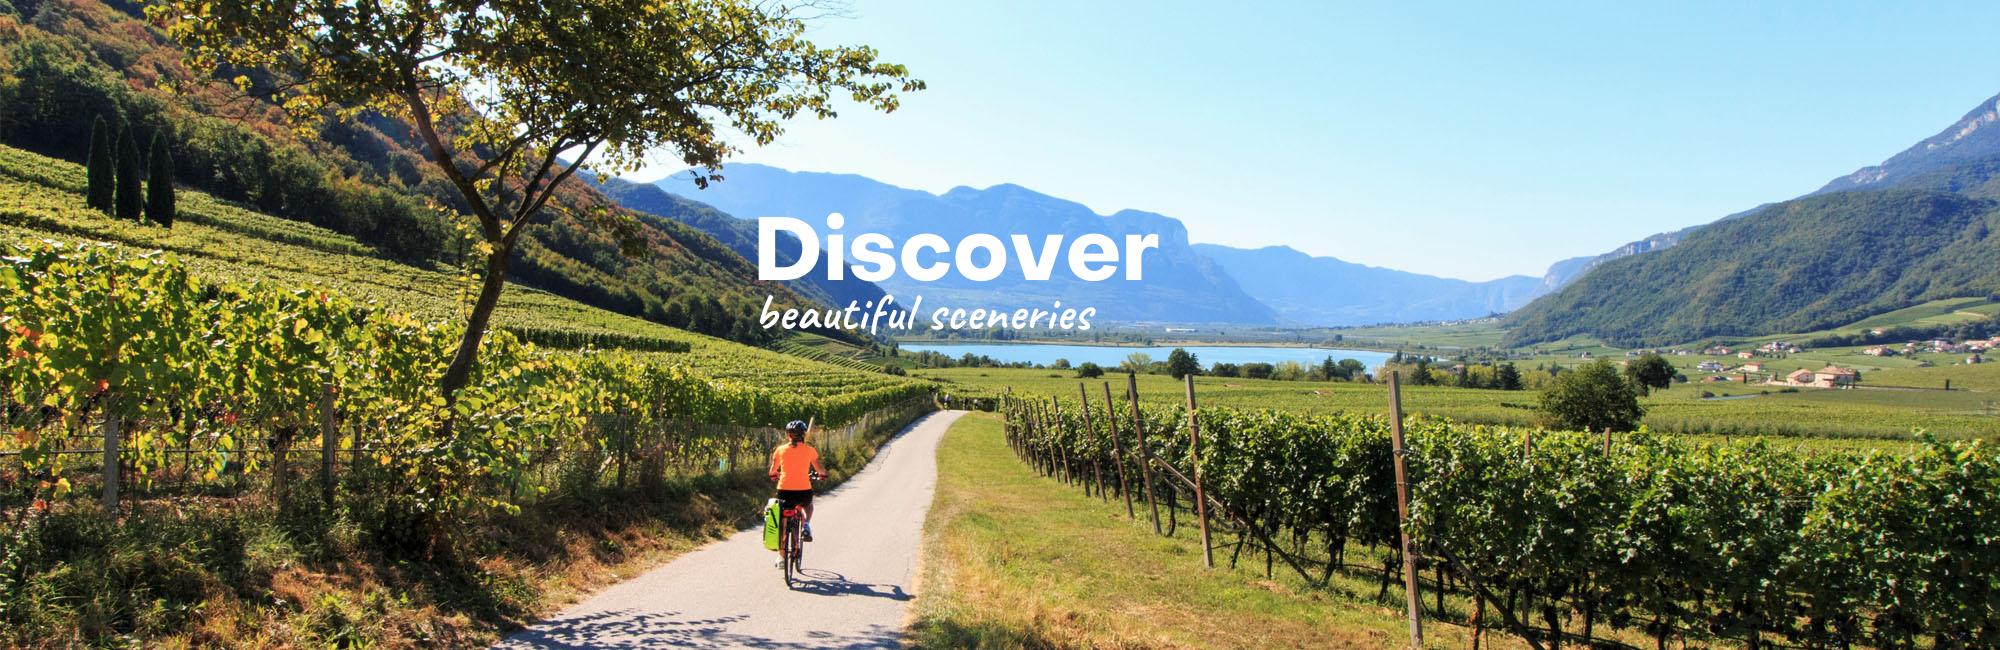 Banner discover beautiful sceneries